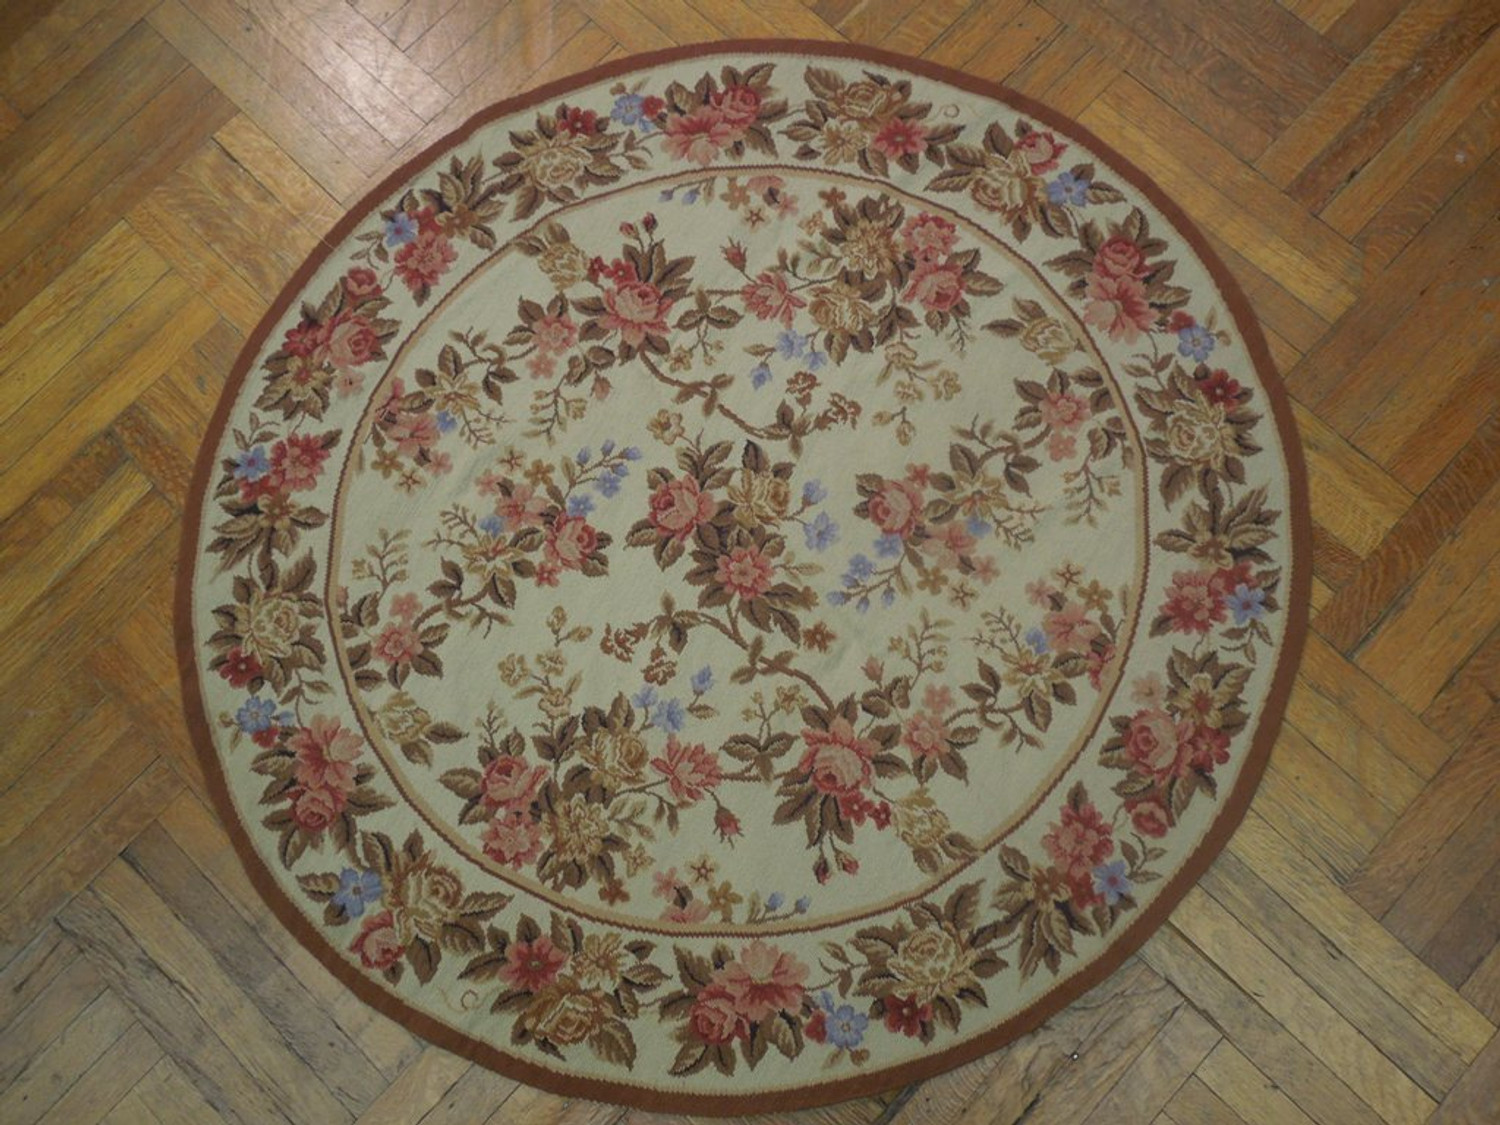 5 x 5 Floral Authentic Needlepoint Flat Weave Round Rug